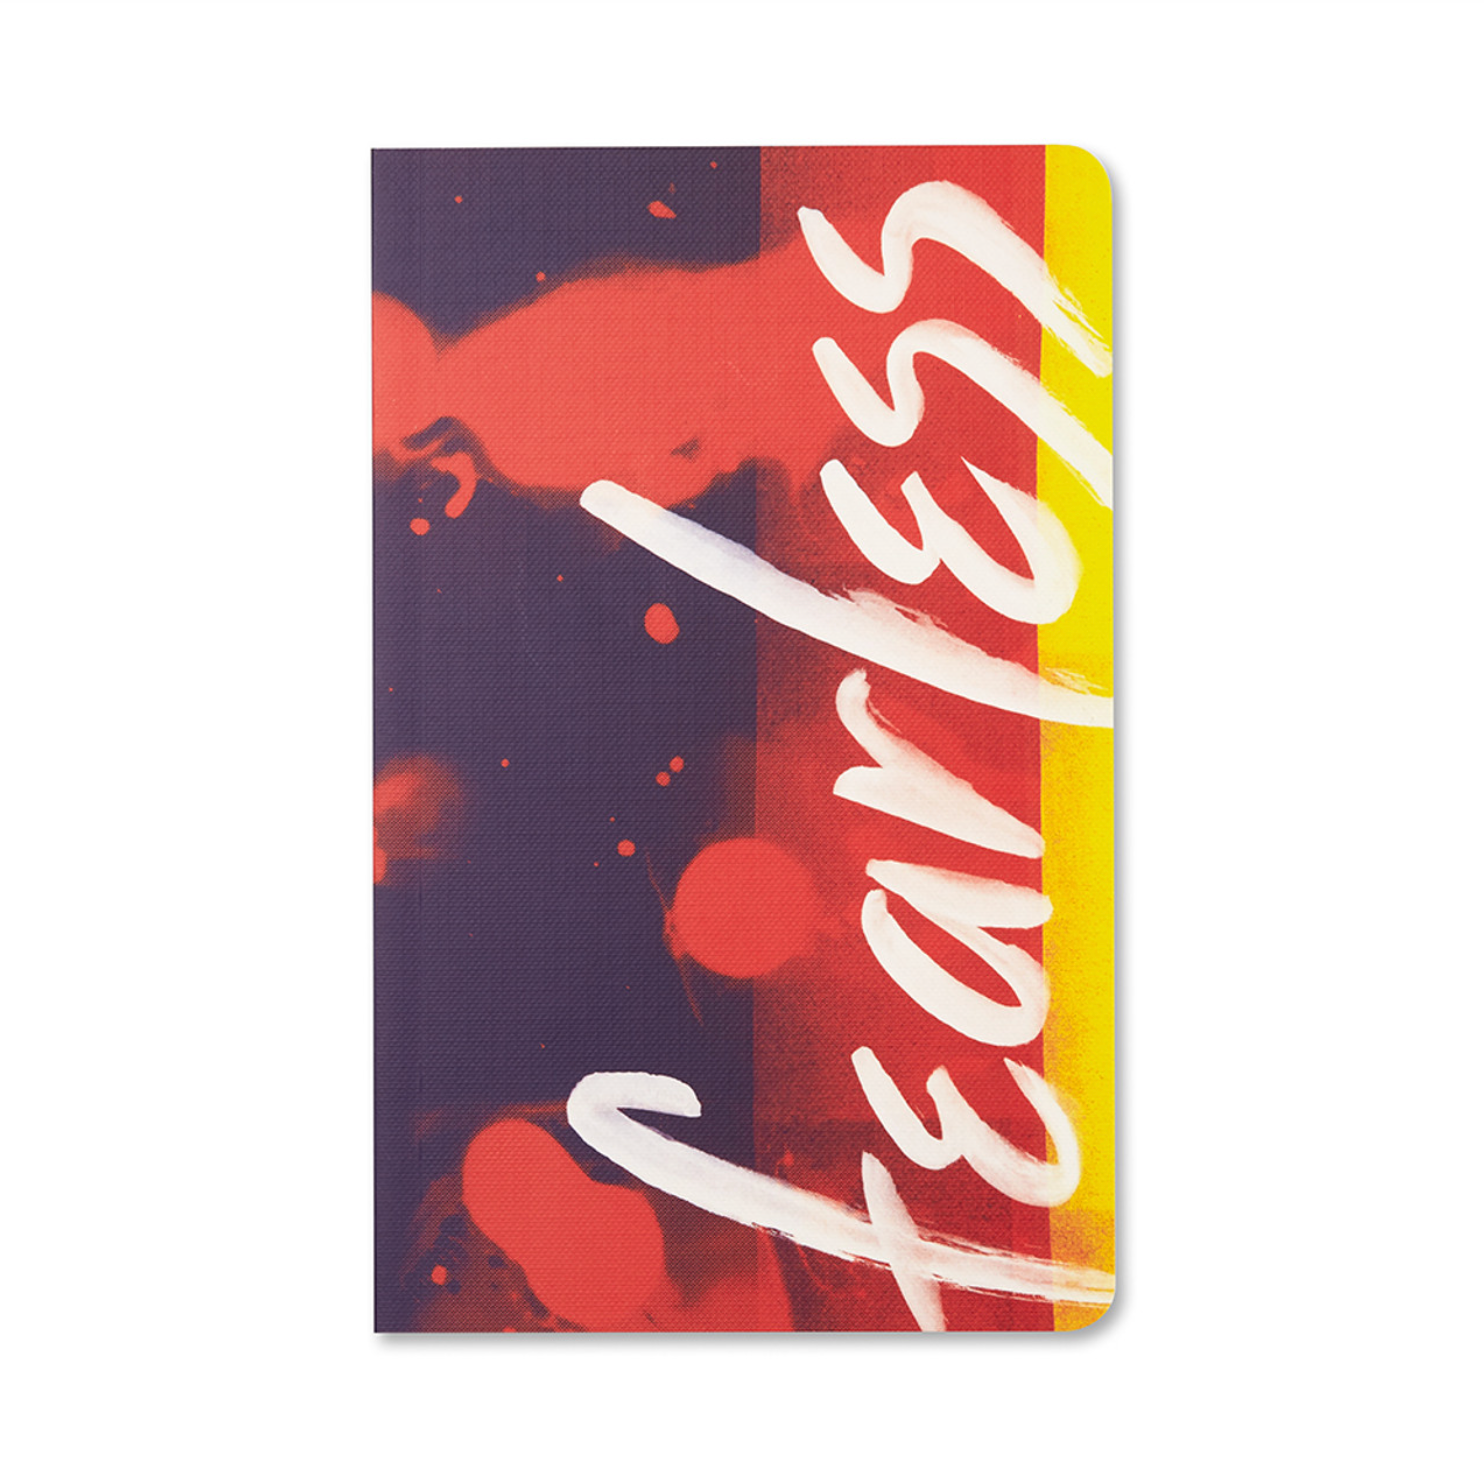 Fearless softcover journal